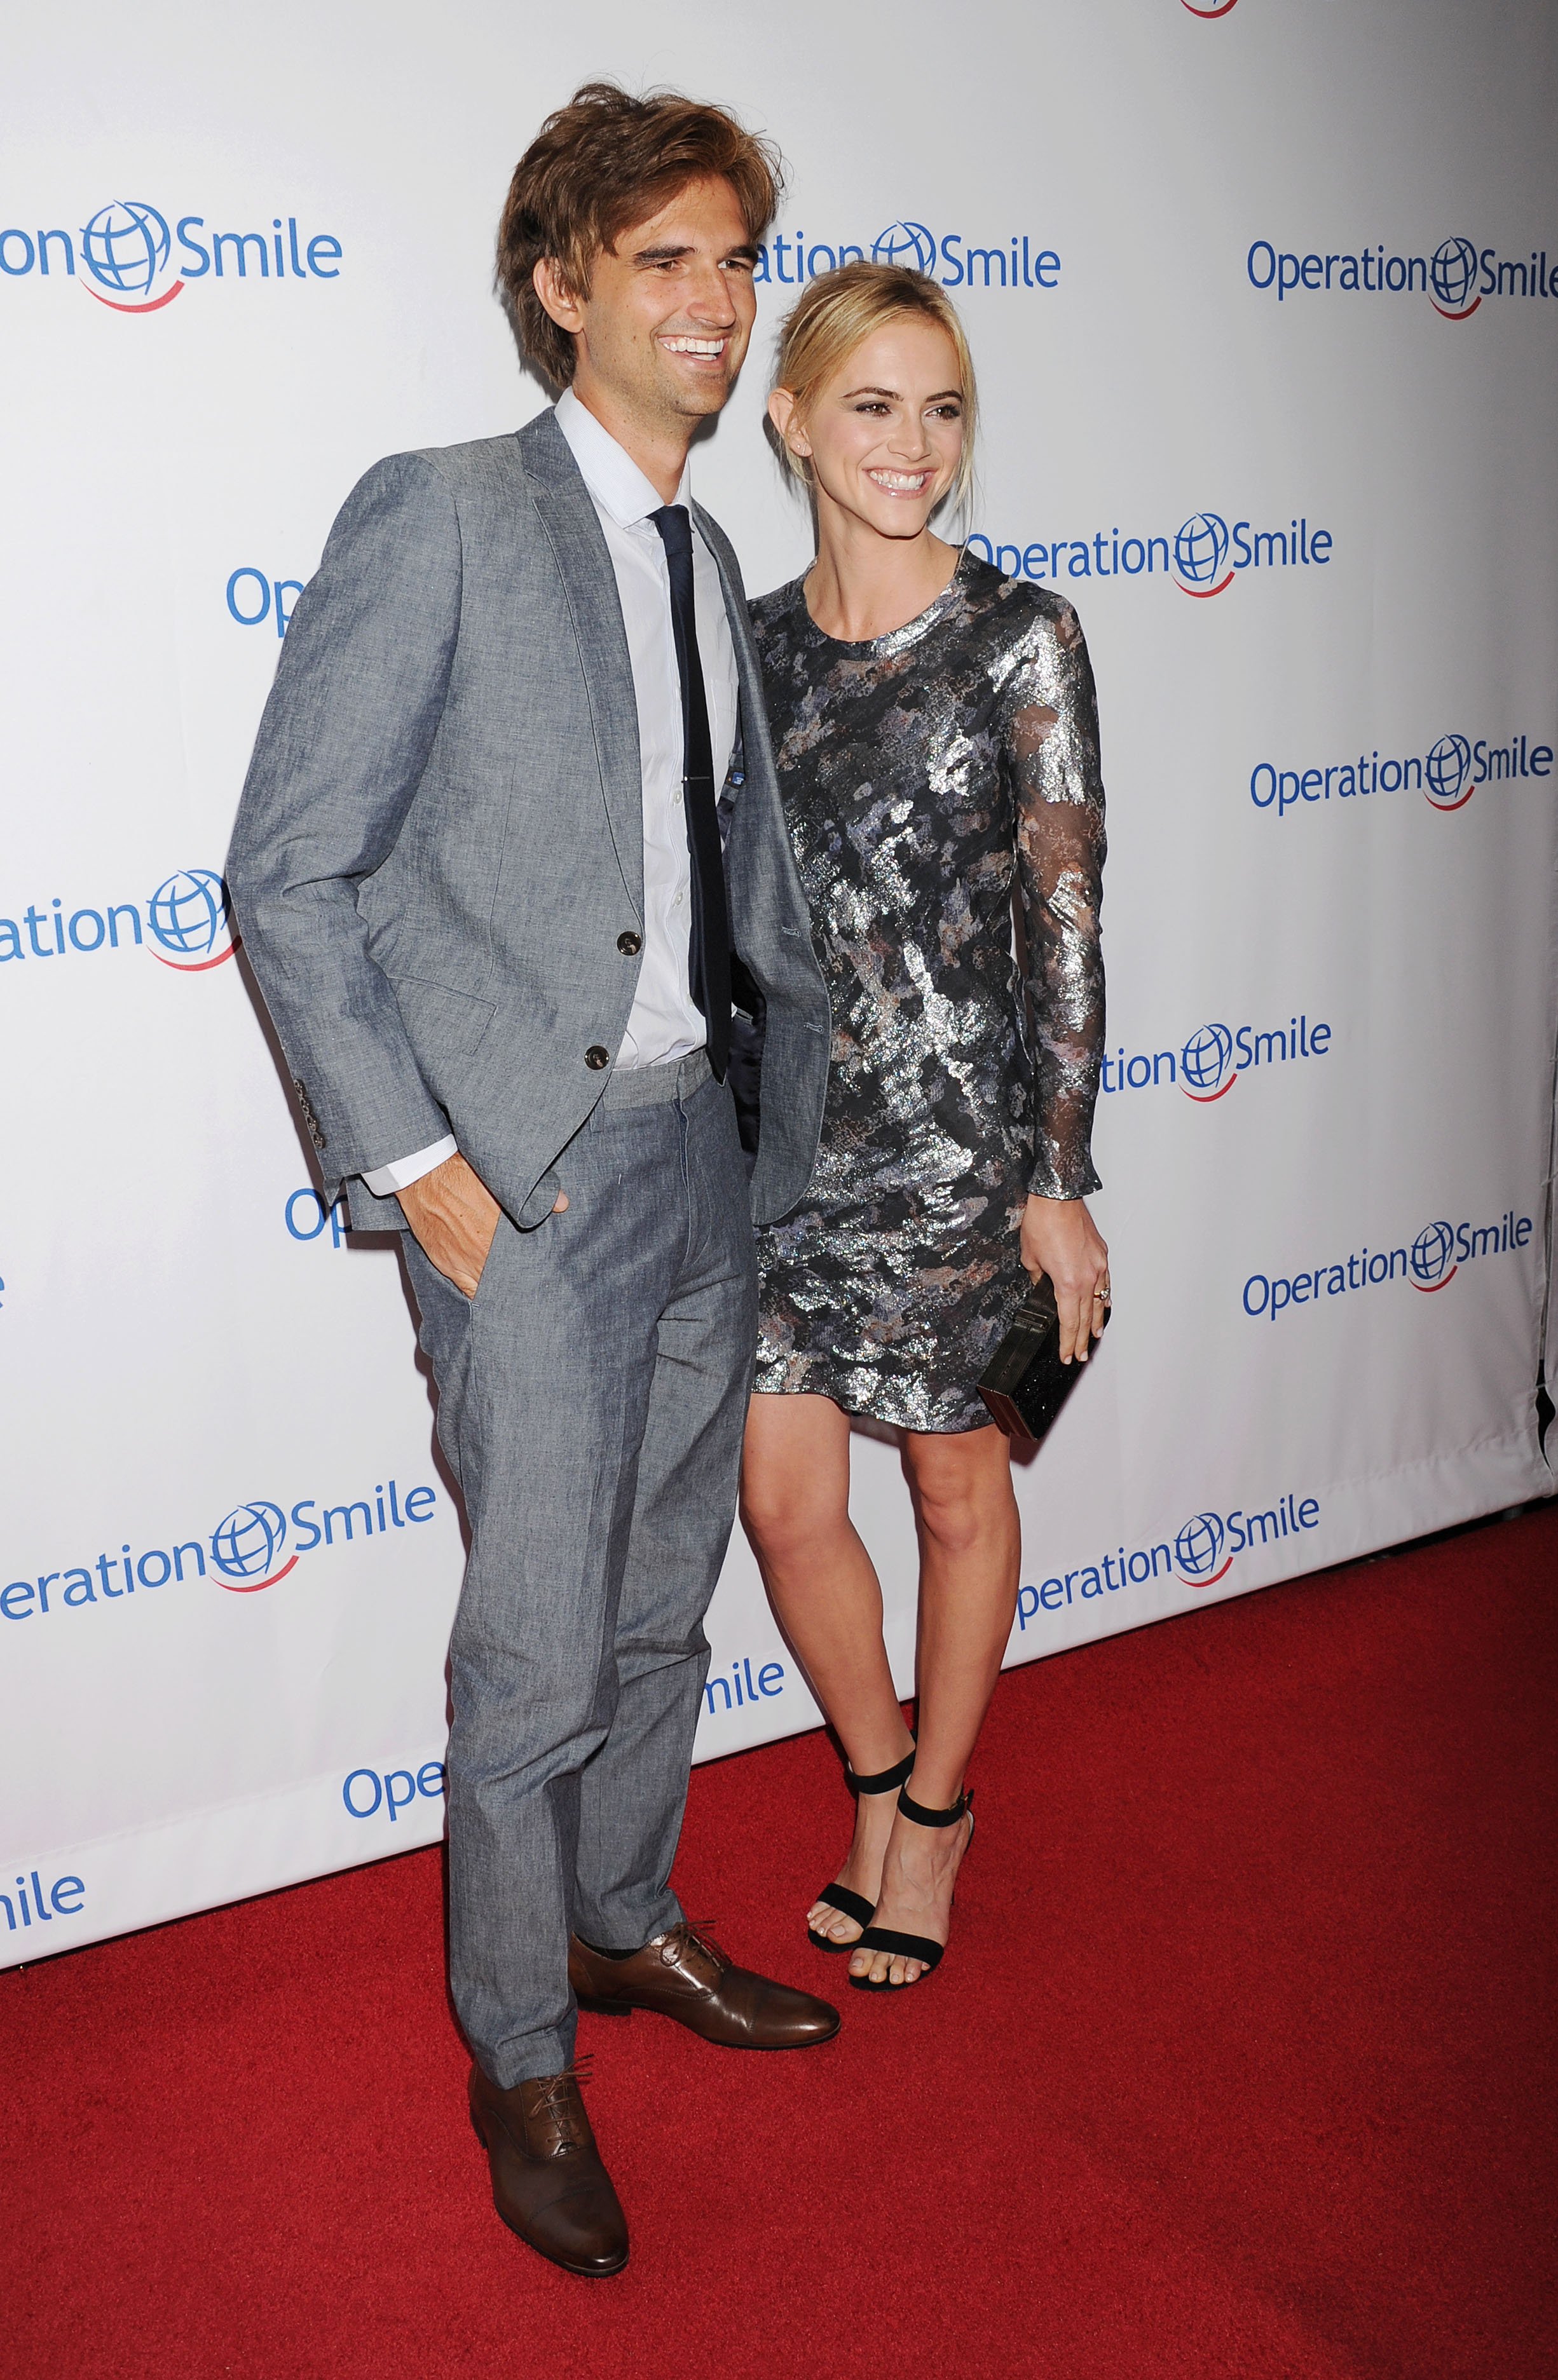 Blake Hanley and Emily Wickersham attend the 2014 Operation Smile Gala on September 19, 2014, in Beverly Hills, California. | Source: Getty Images